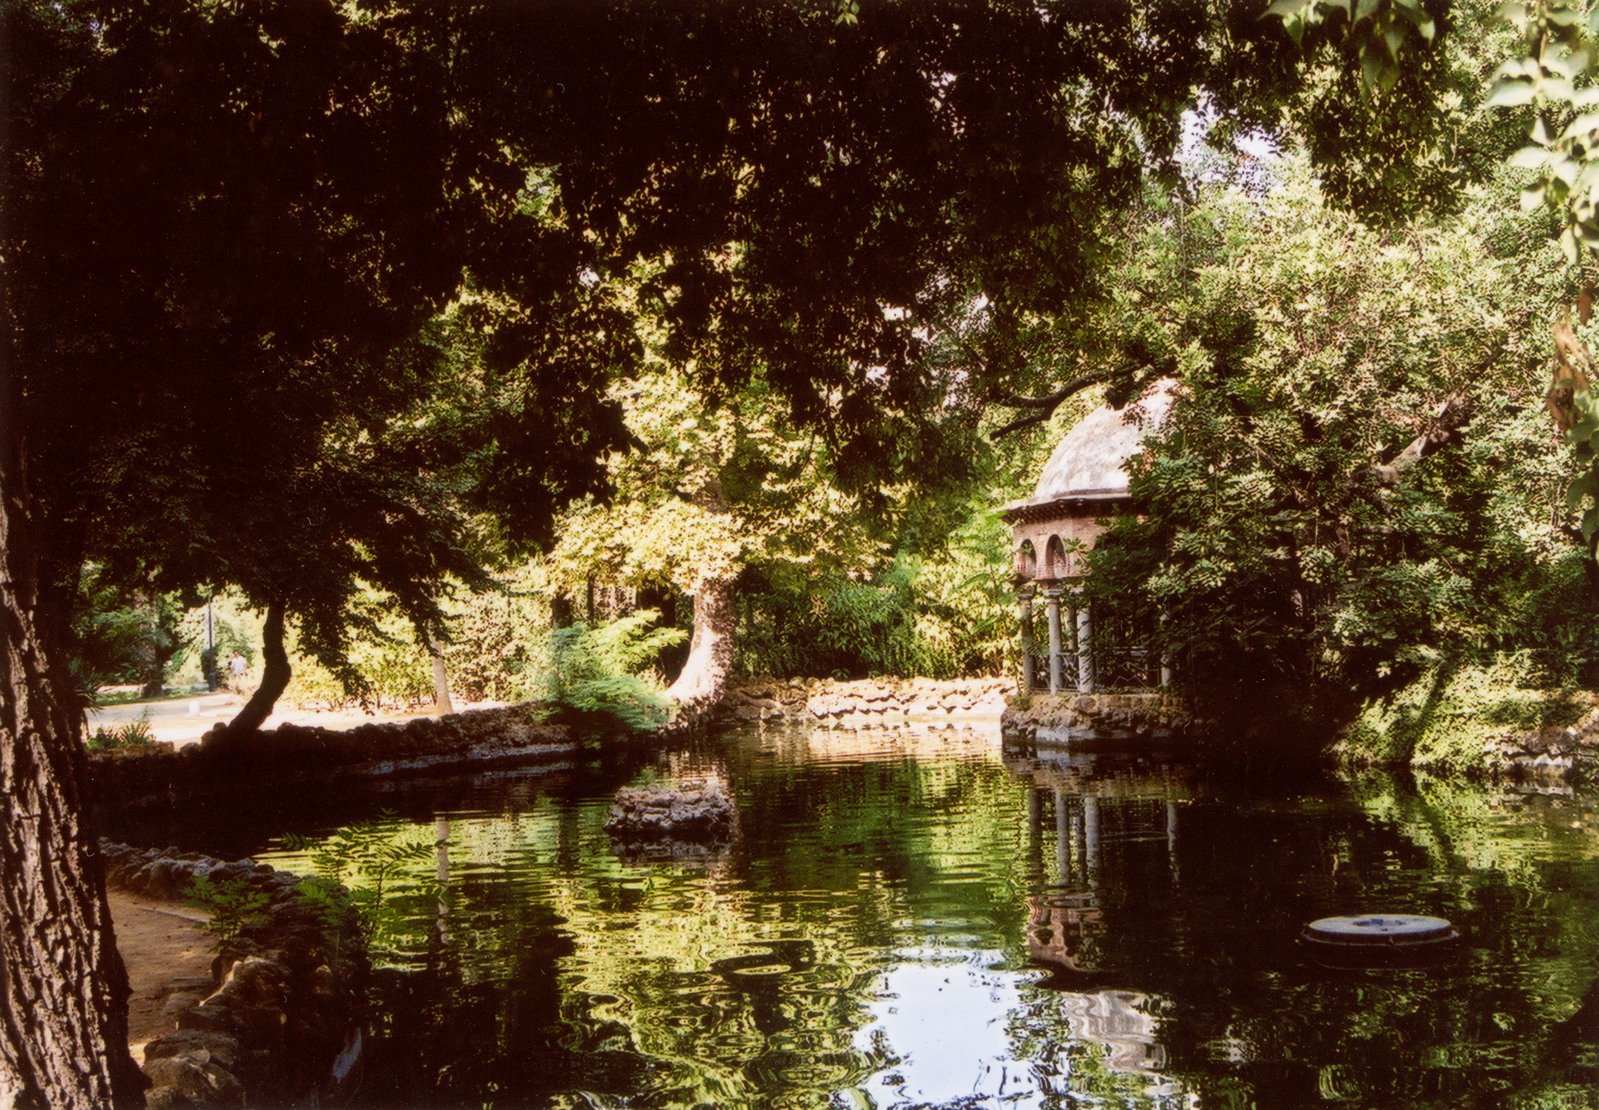 water in a pond surrounded by trees with small shack